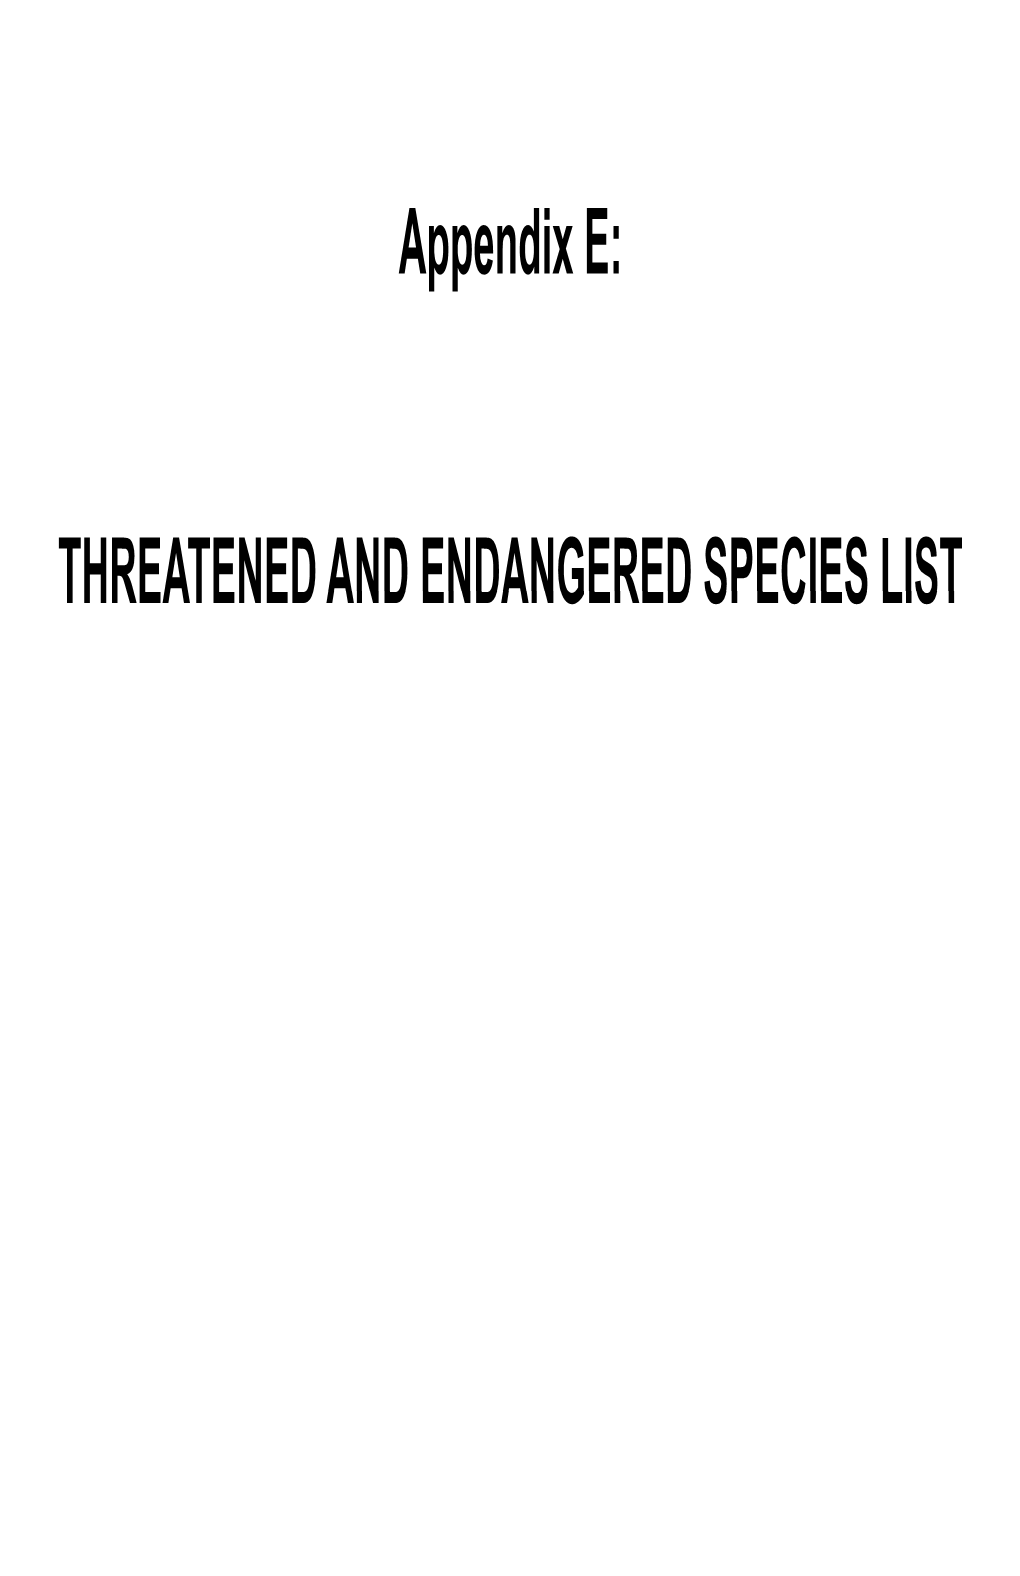 Threatened and Endangered Species List